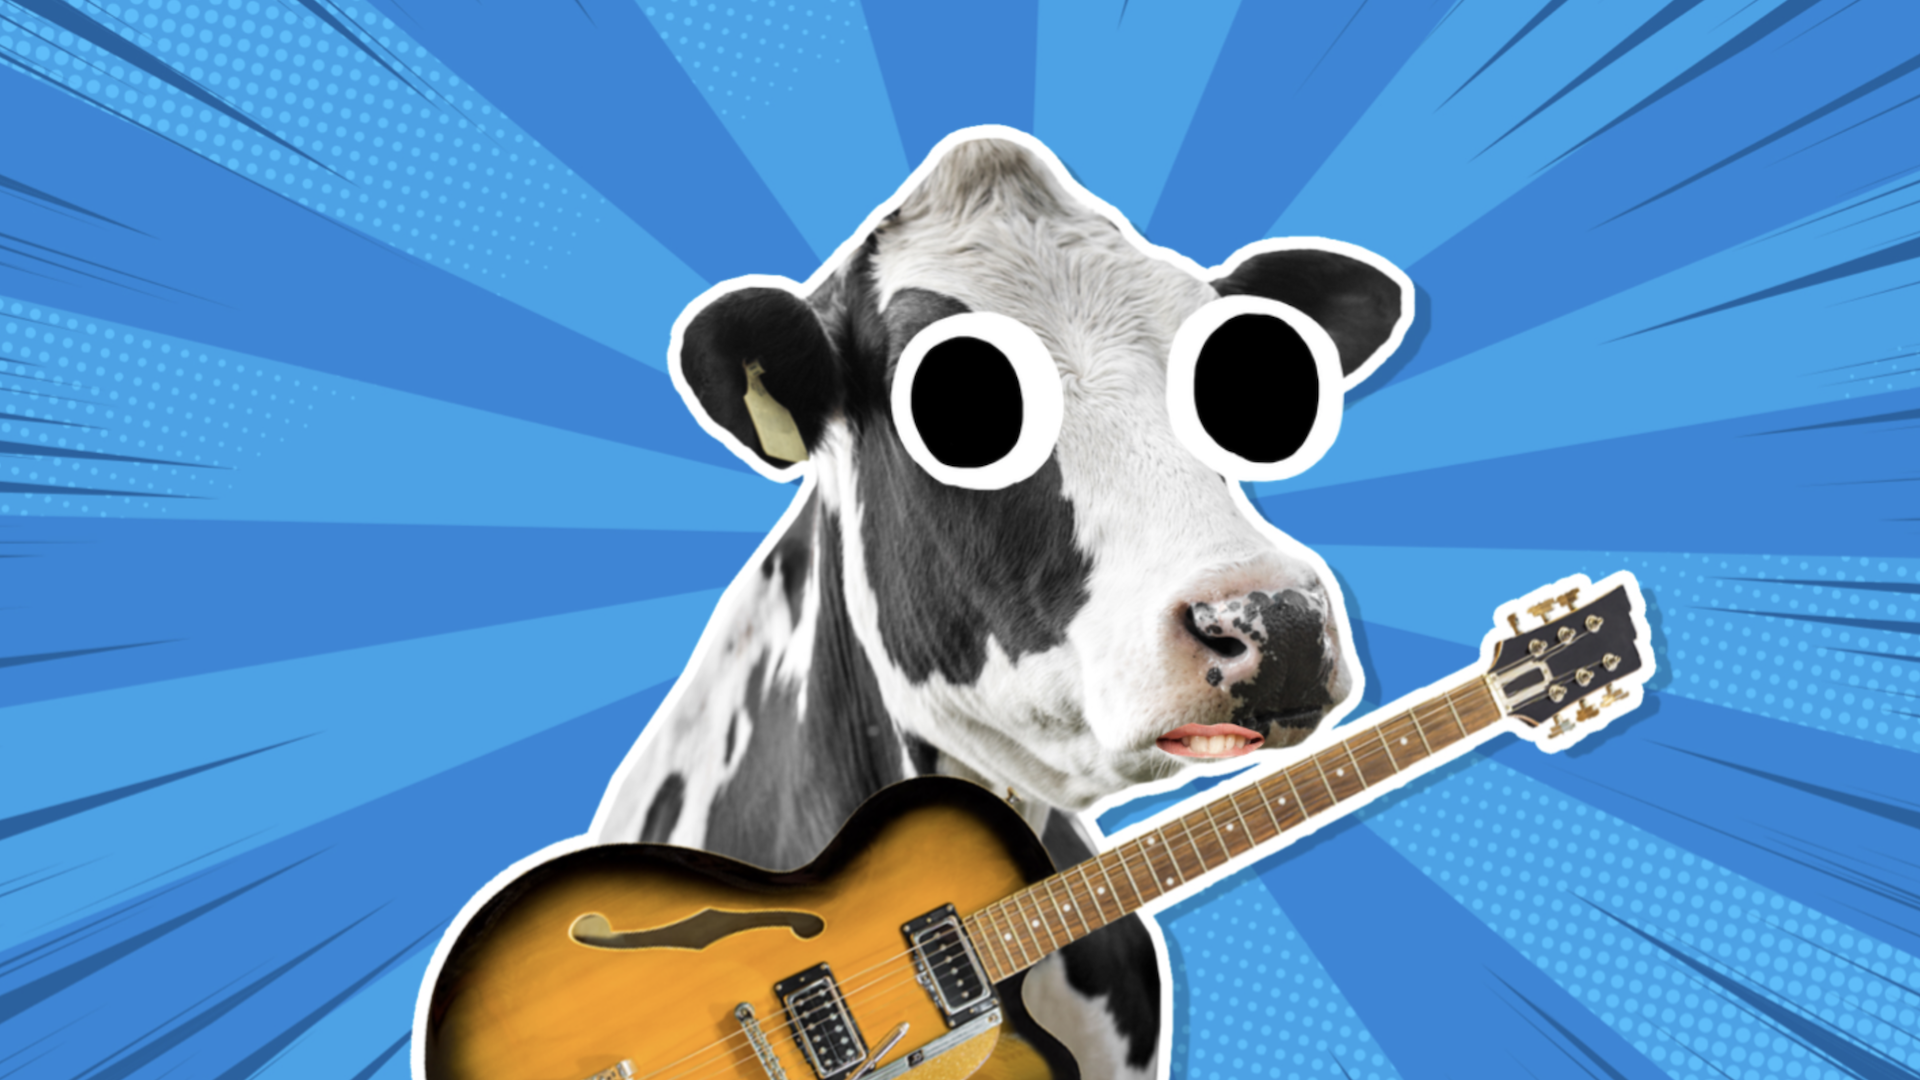 Black and white cow playing electric guitar